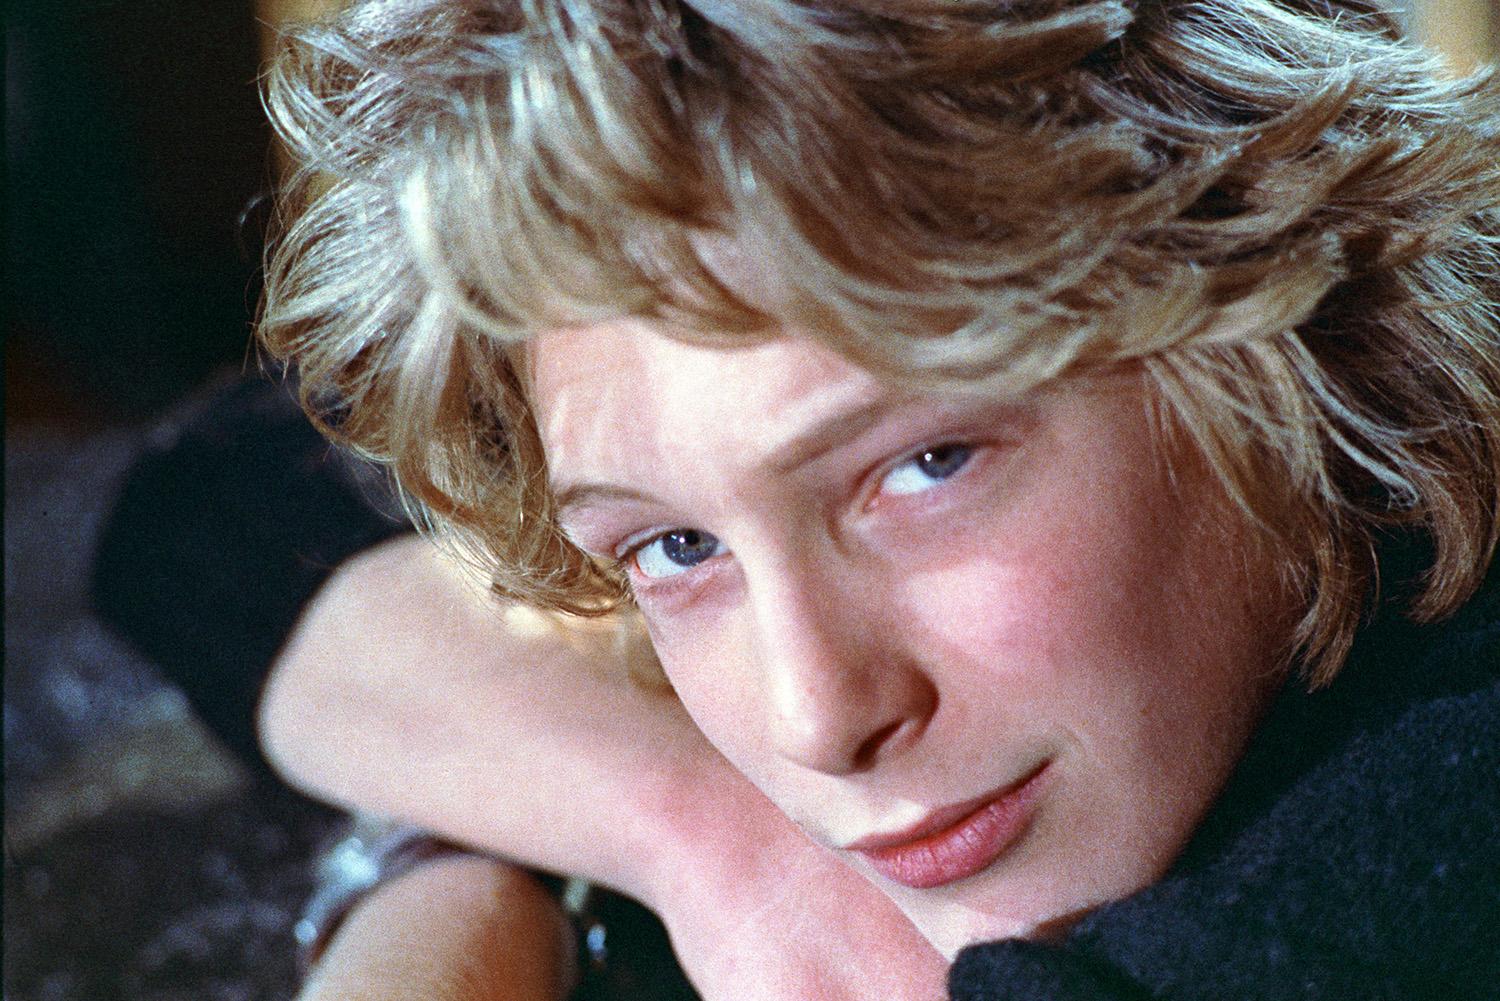 A blond teenage boy looking into the camera.